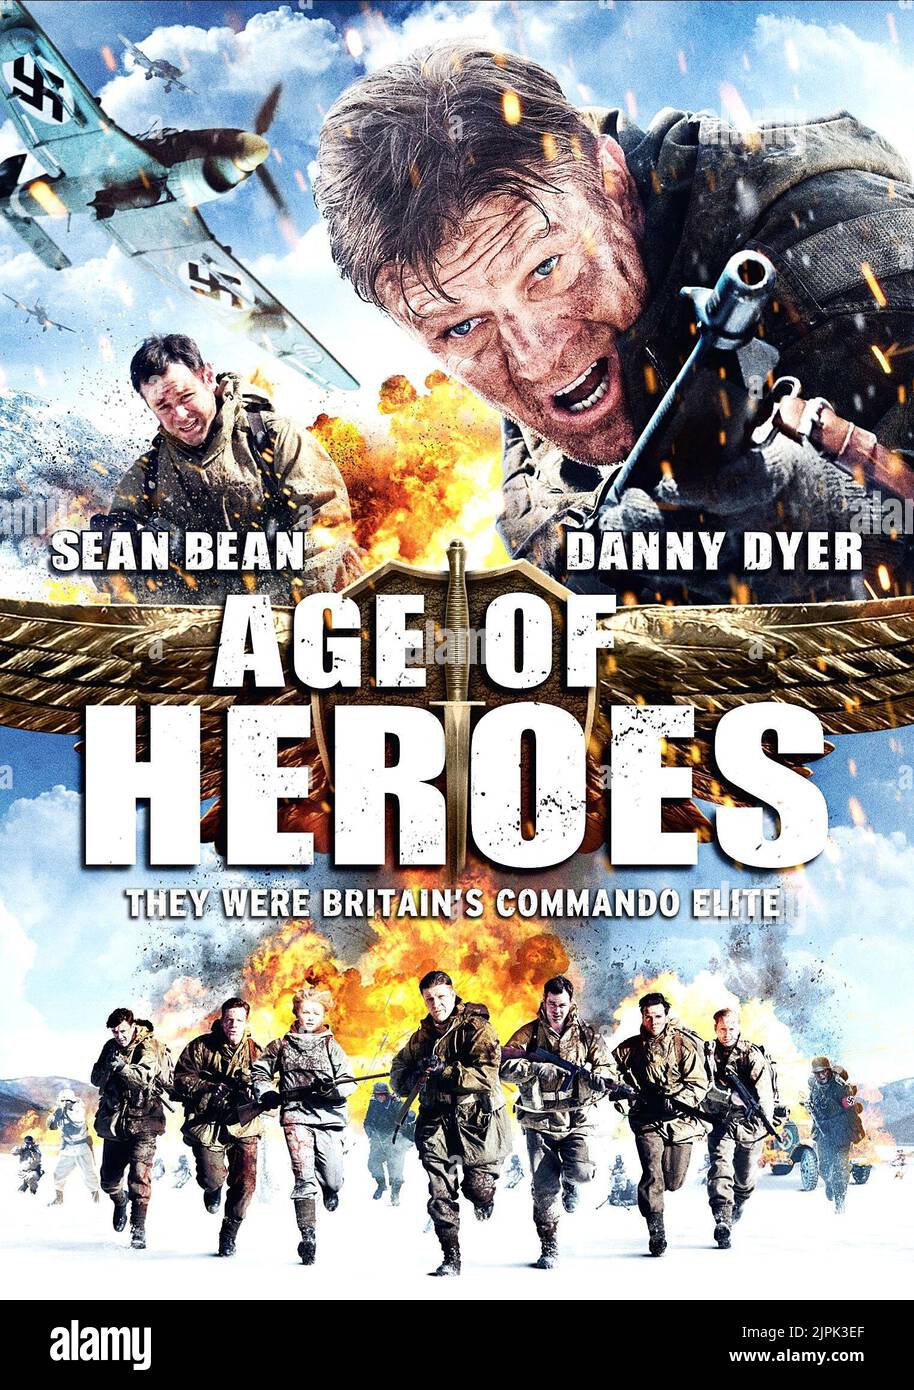 DANNY DYER, SEAN BEAN POSTER, AGE OF HEROES, 2011 Stock Photo